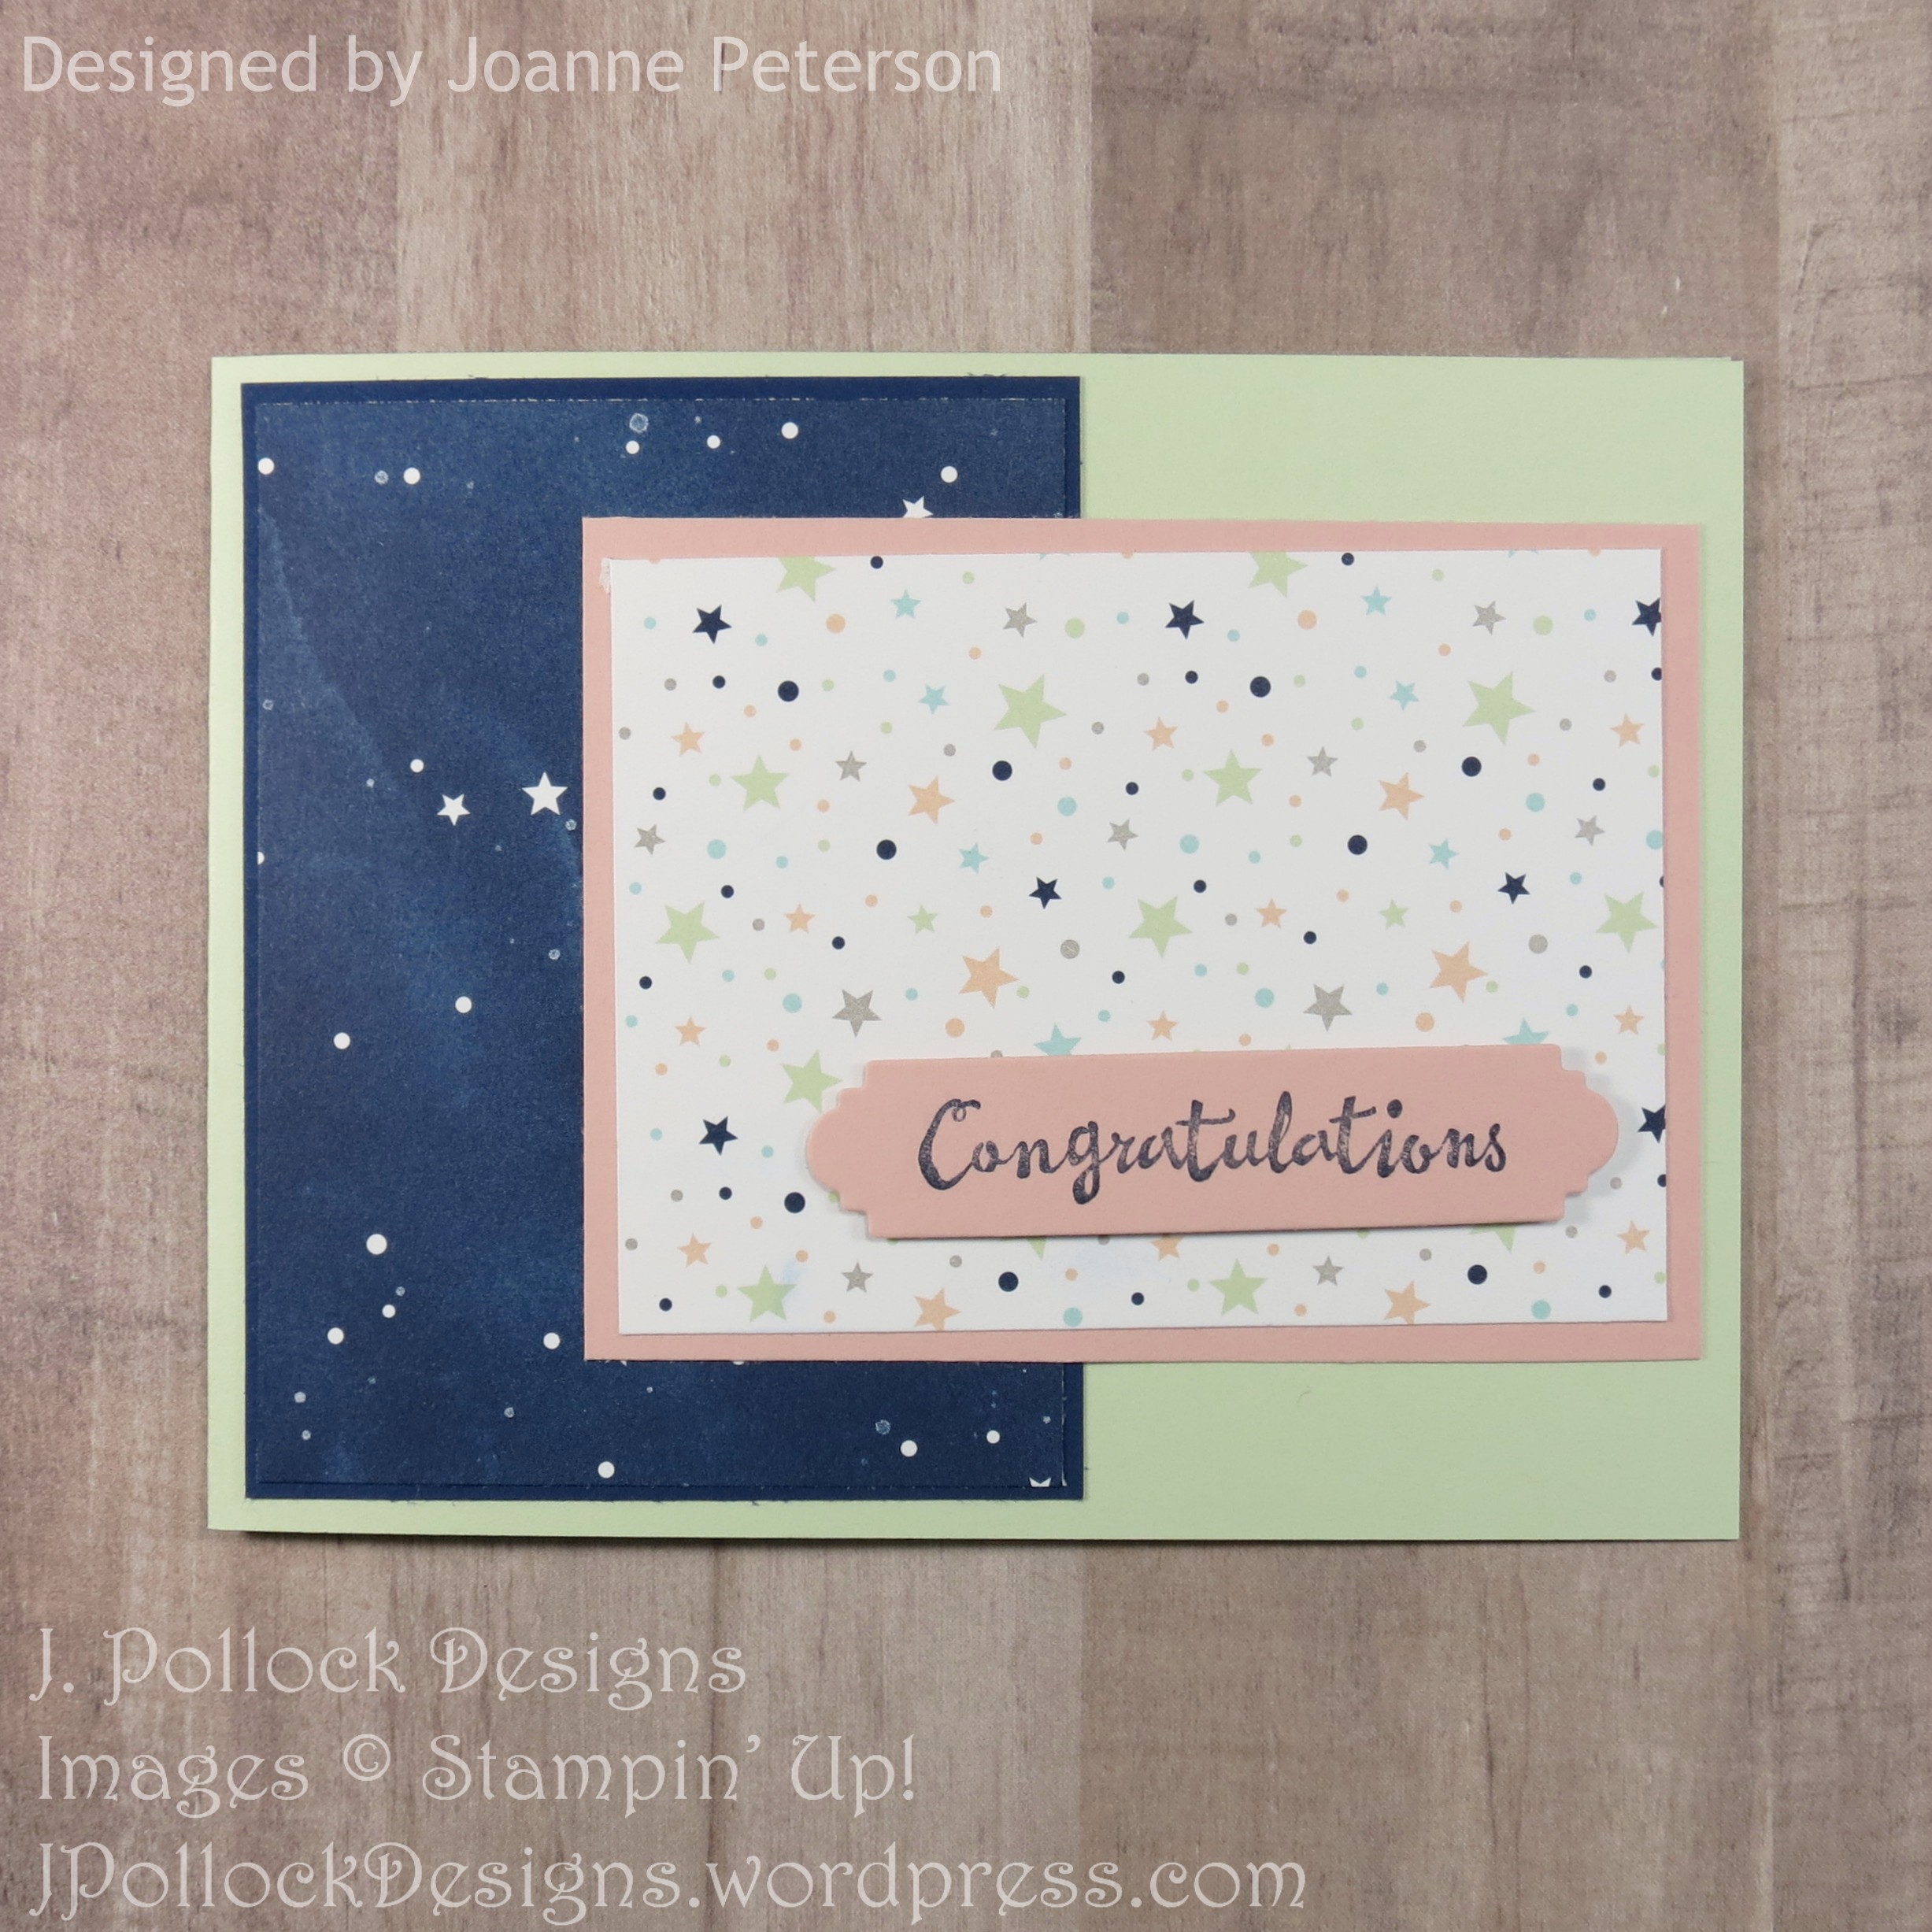 J. Pollock Designs - Stampin' Up! - Swap Cards March 2019